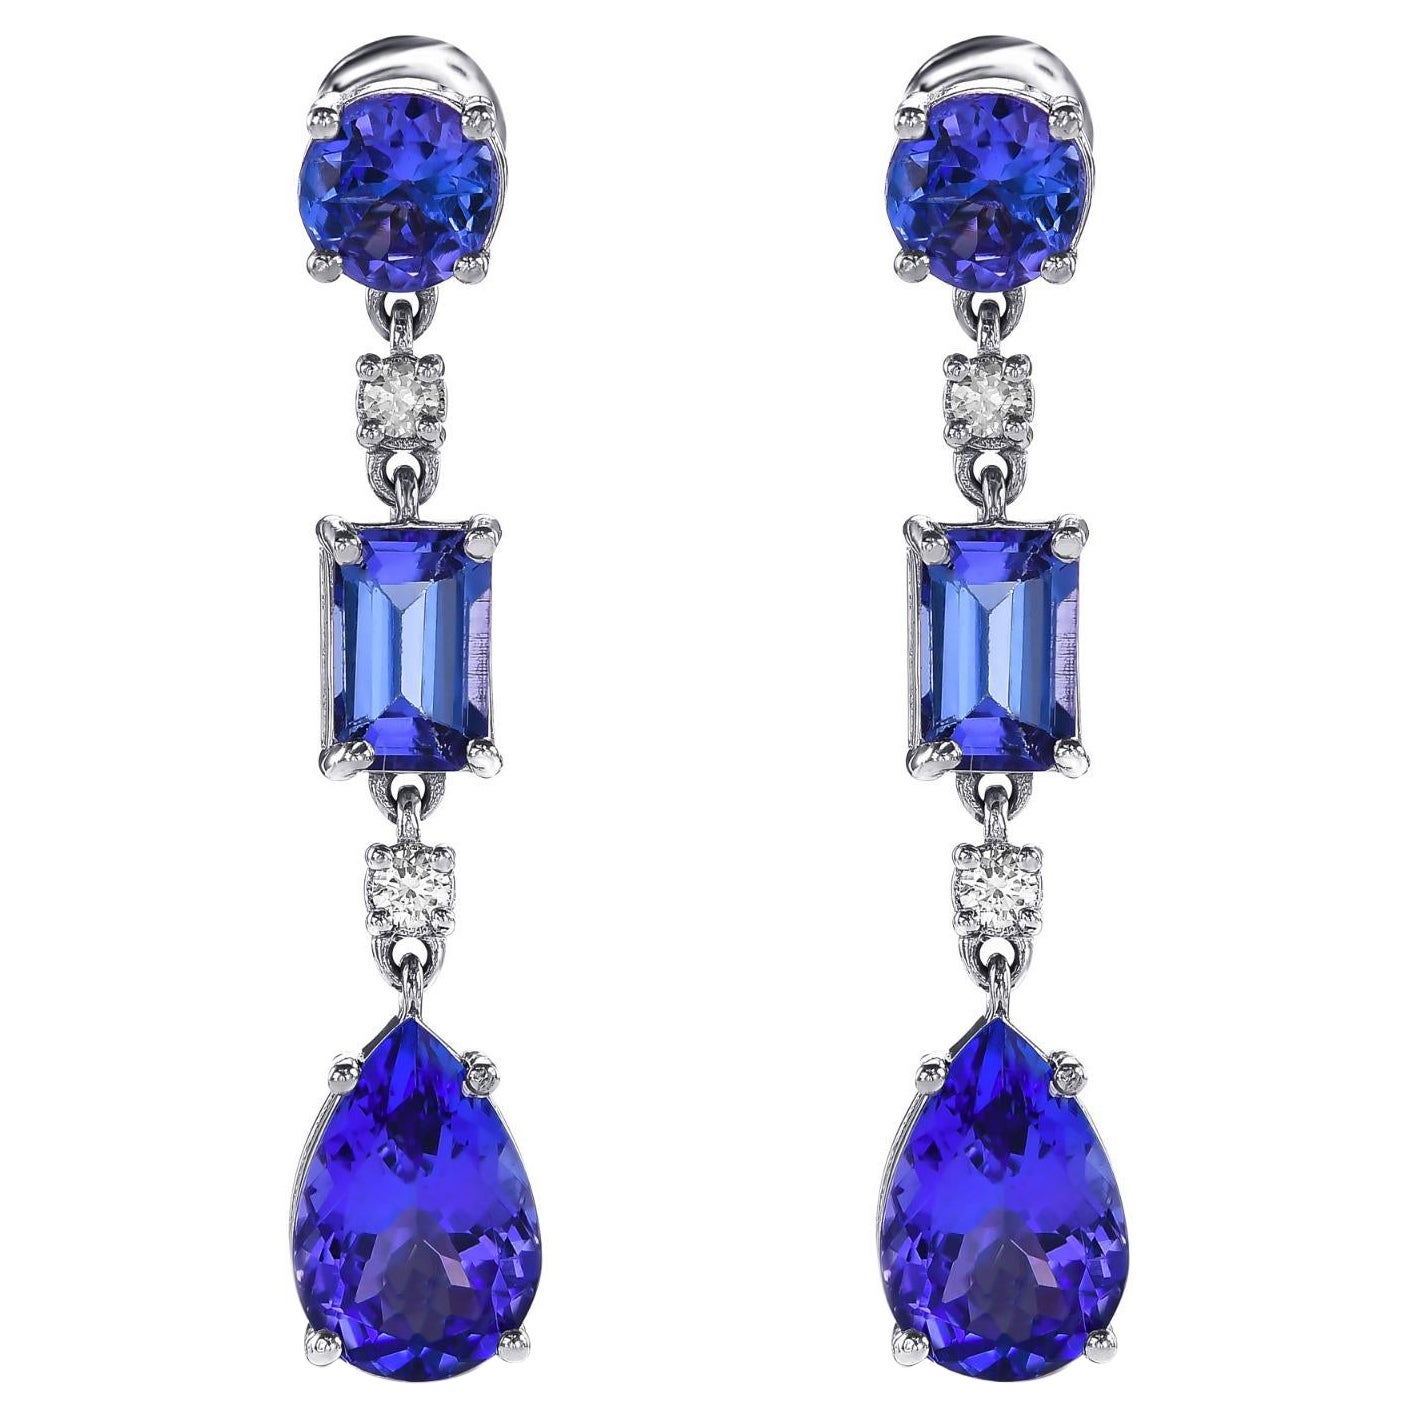 Perfect Color 4.19 Ct Tanzanite and Diamonds Earrings